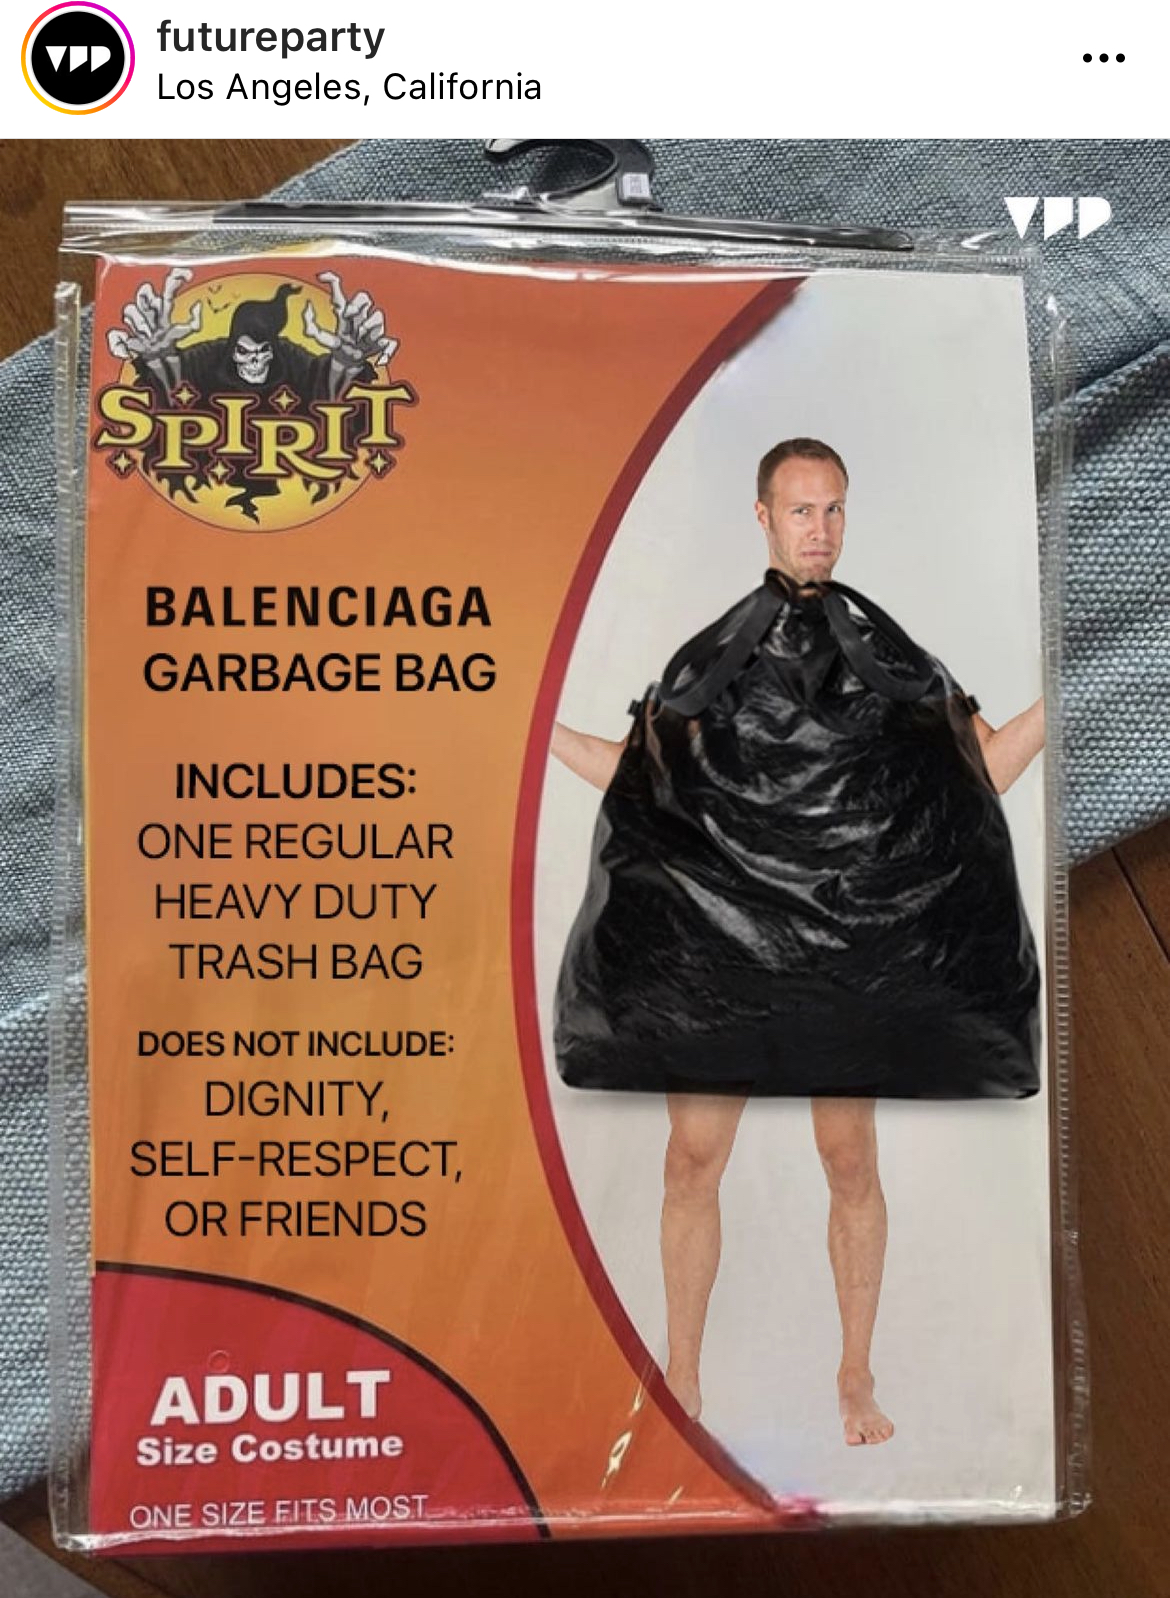 Costume Memes - spirit halloween - Tpp Heaks futureparty Los Angeles, California Spirit Balenciaga Garbage Bag Includes One Regular Heavy Duty Trash Bag Does Not Include Dignity, SelfRespect, Or Friends Adult Size Costume One Size Fits Most